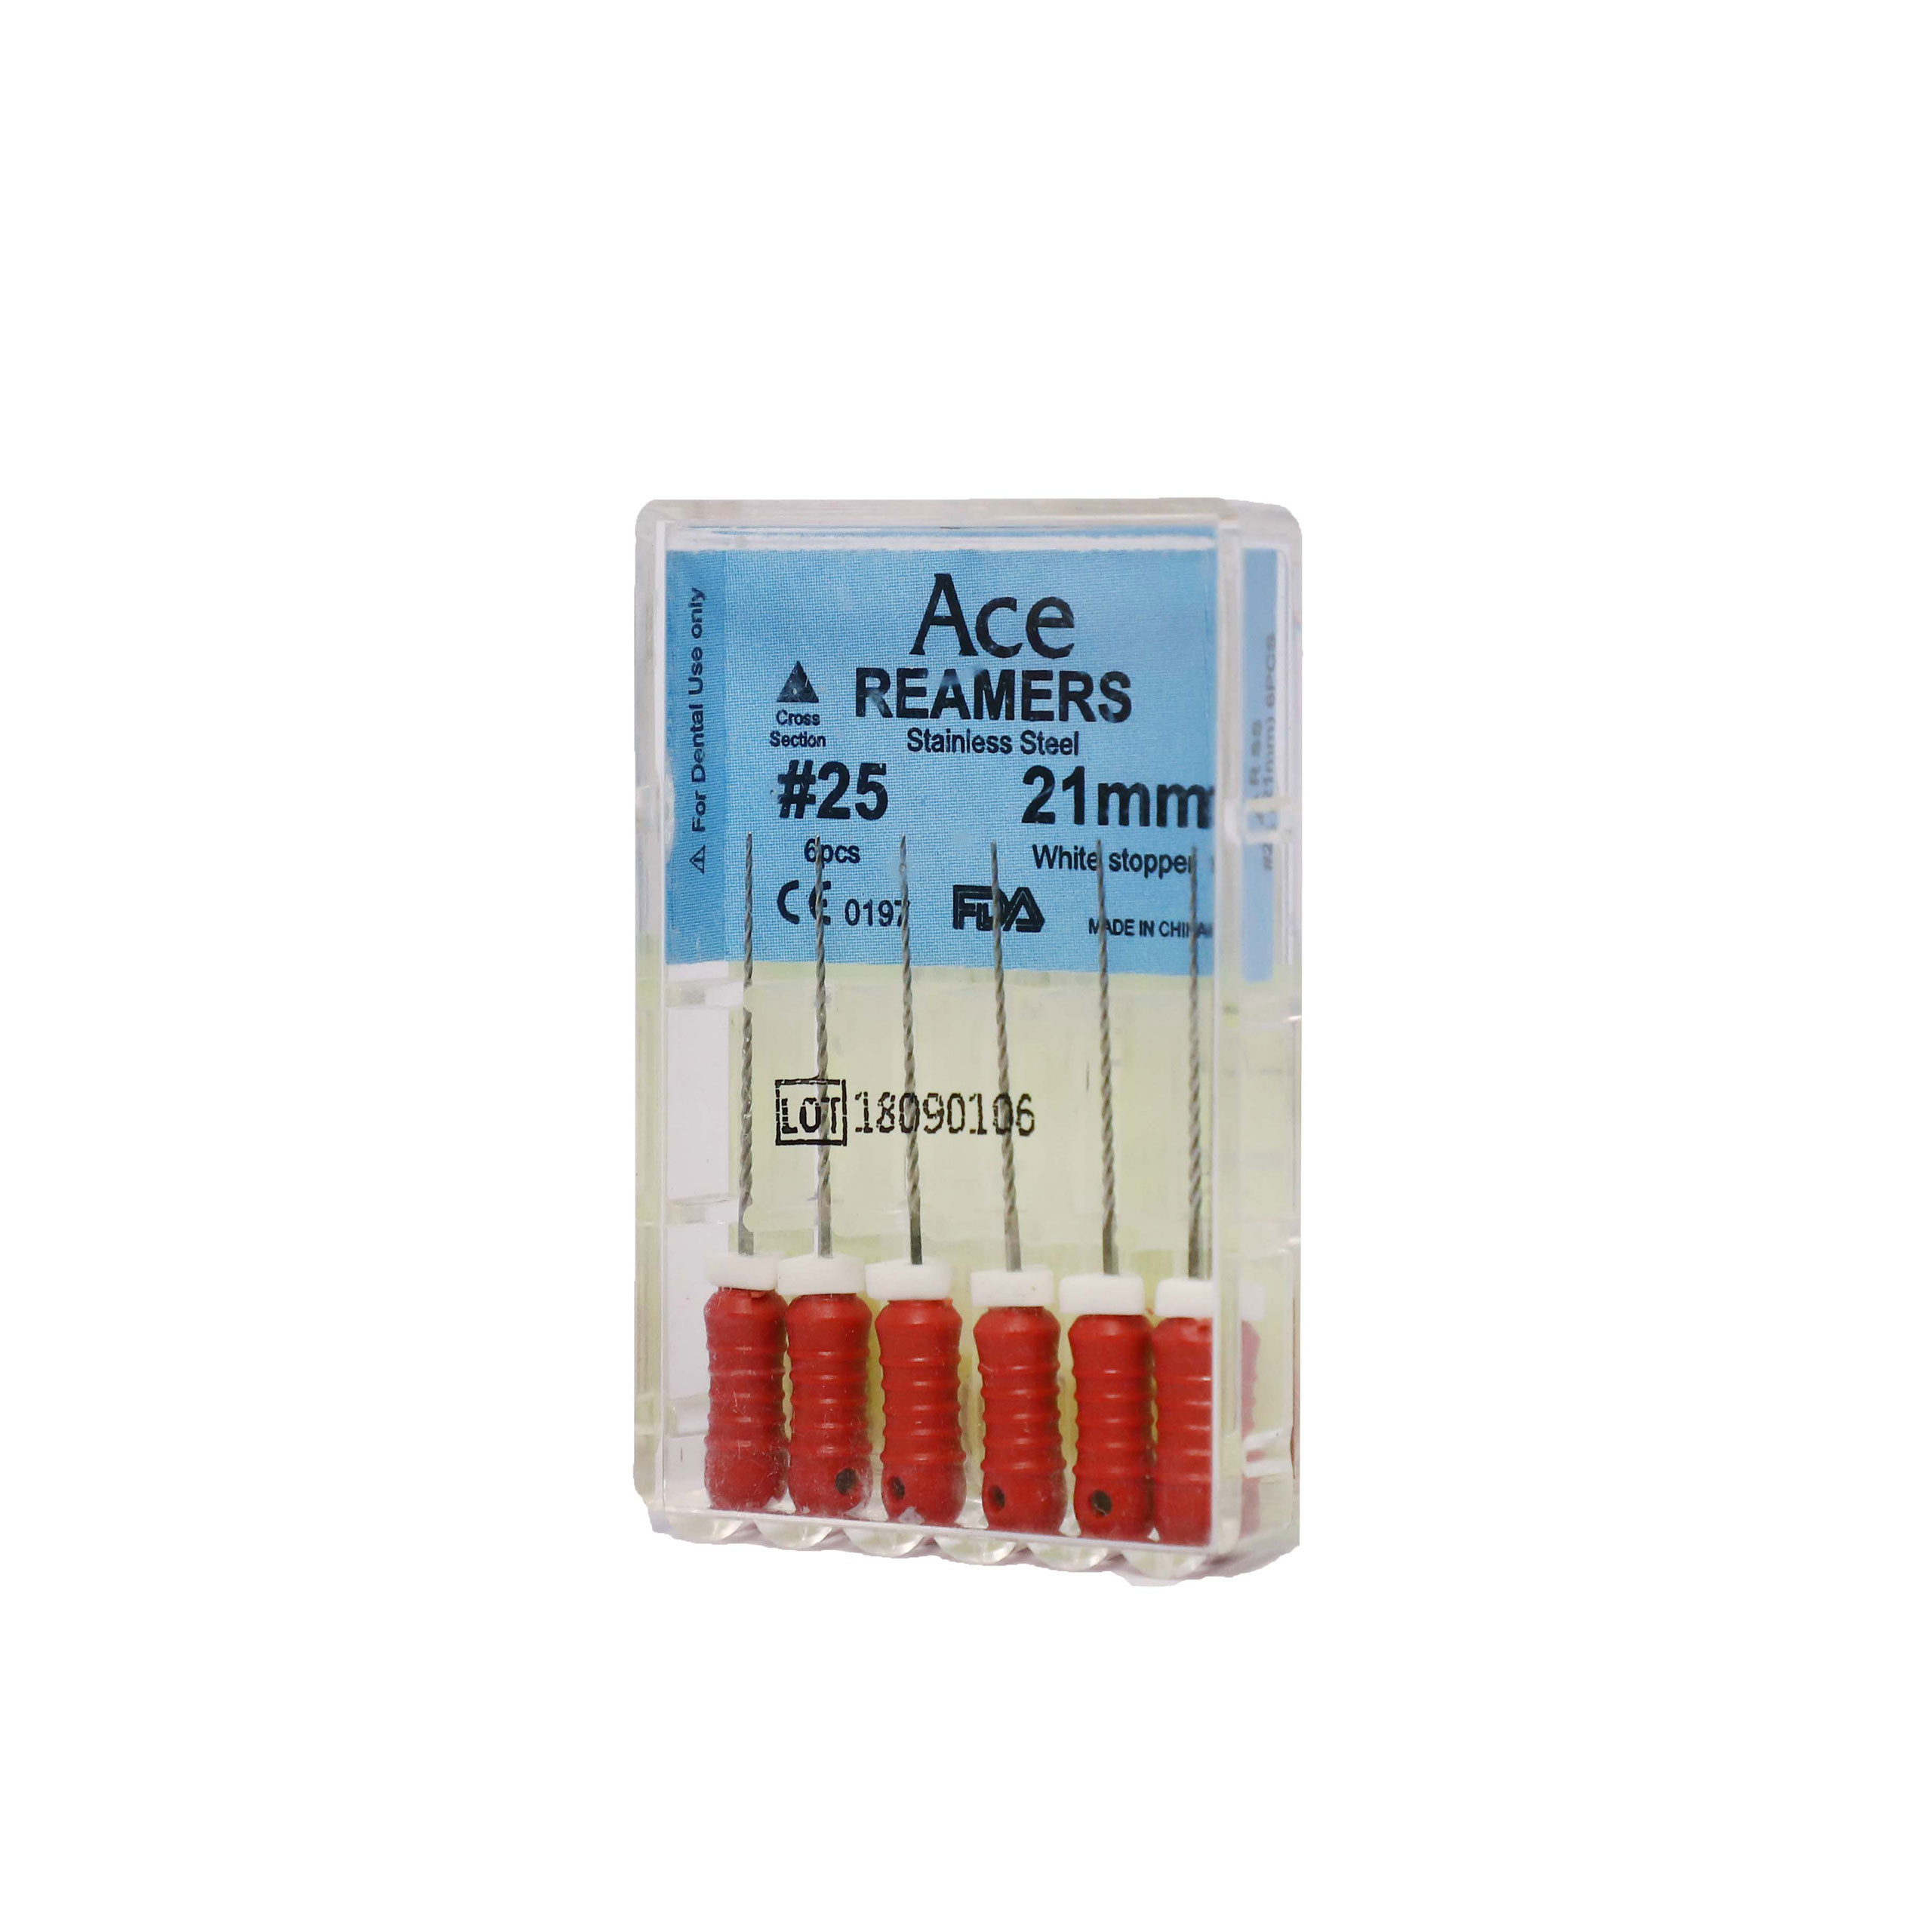 Ace Reamers #25 21mm  (Pack of 5)